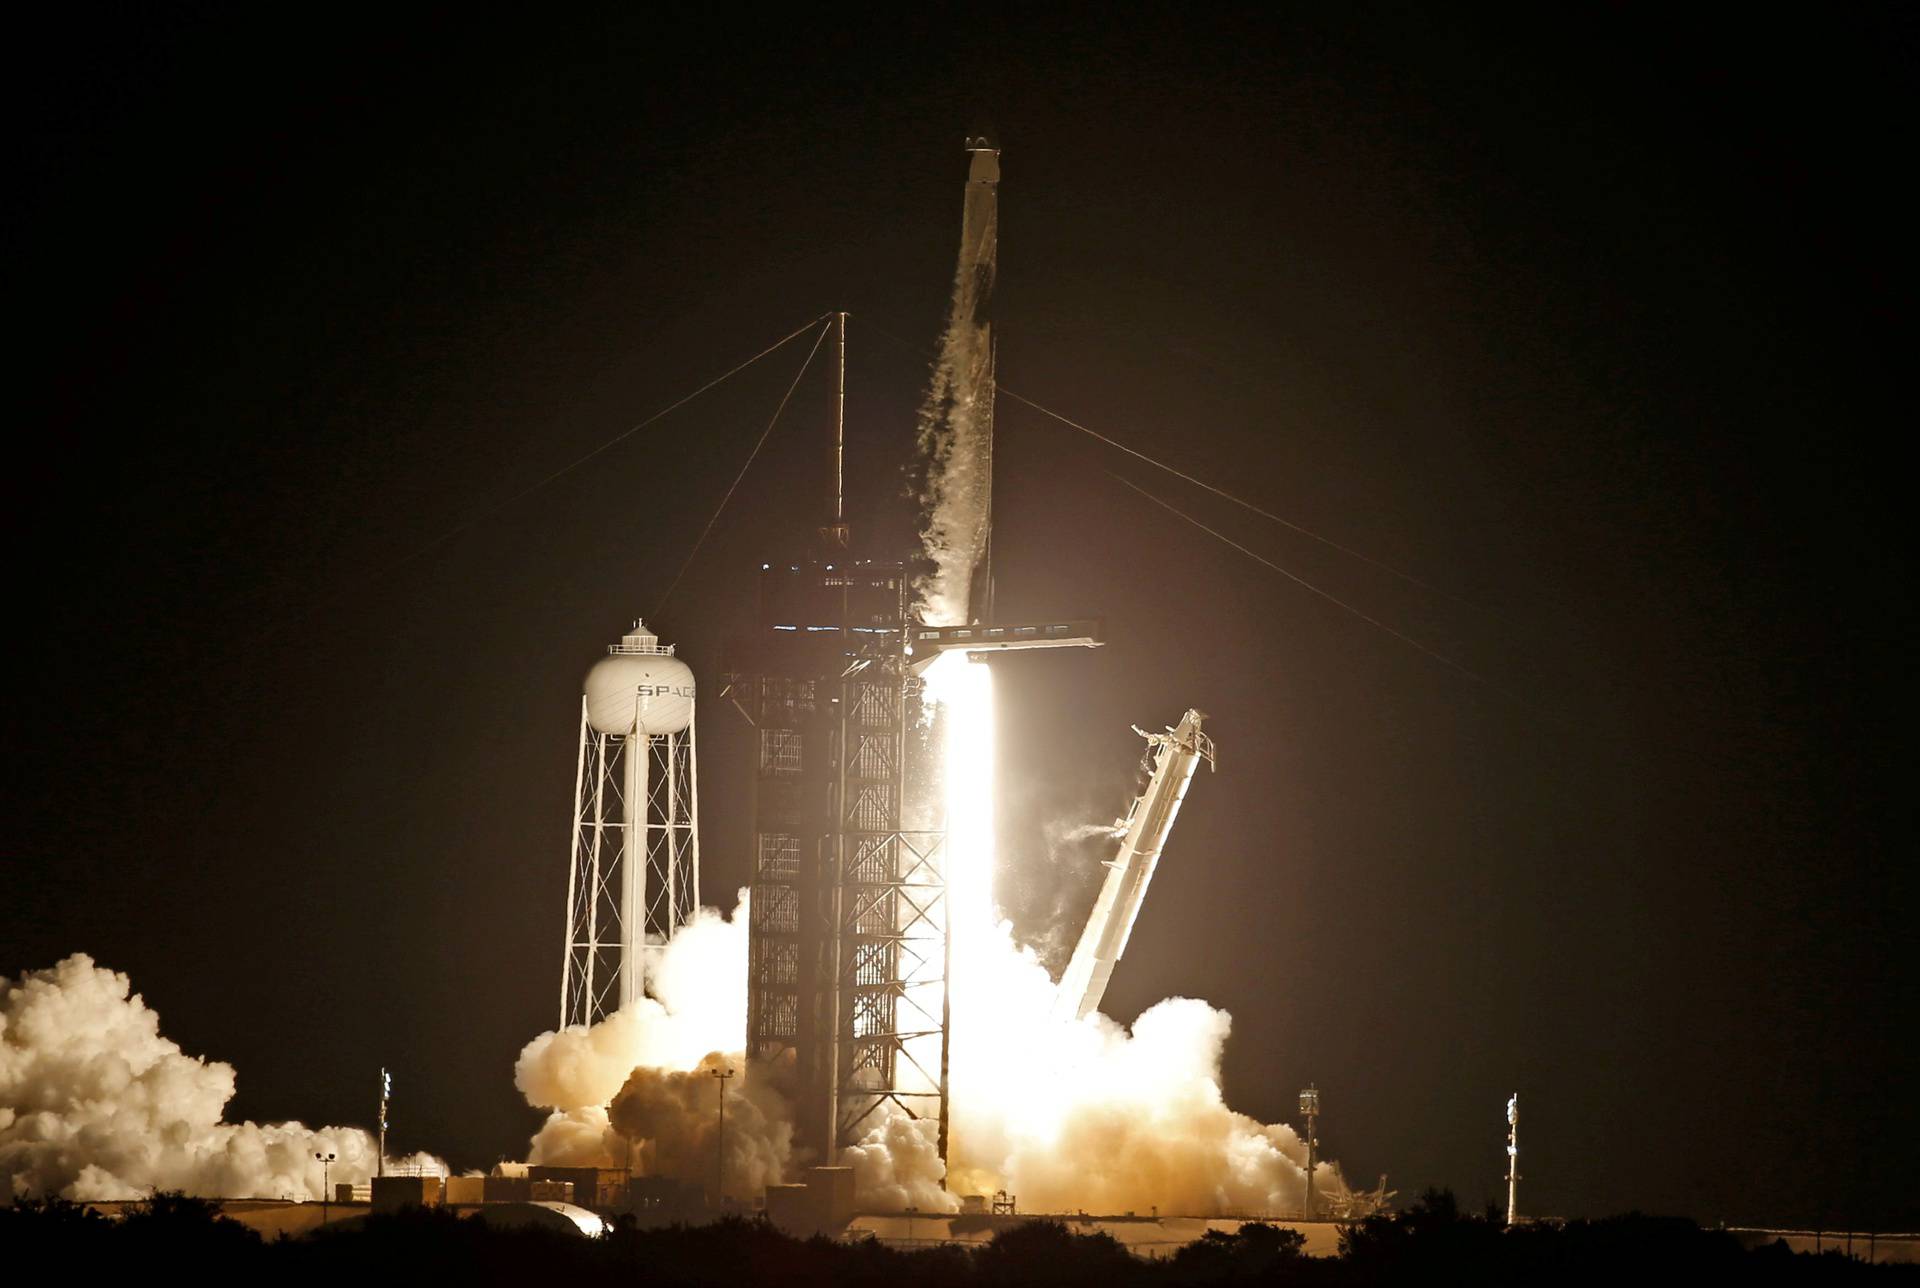 A SpaceX Falcon 9 rocket with the Crew Dragon capsule lifts off from Pad 39A on the Inspiration 4 civilian crew mission at the Kennedy Space Center in Cape Canaveral